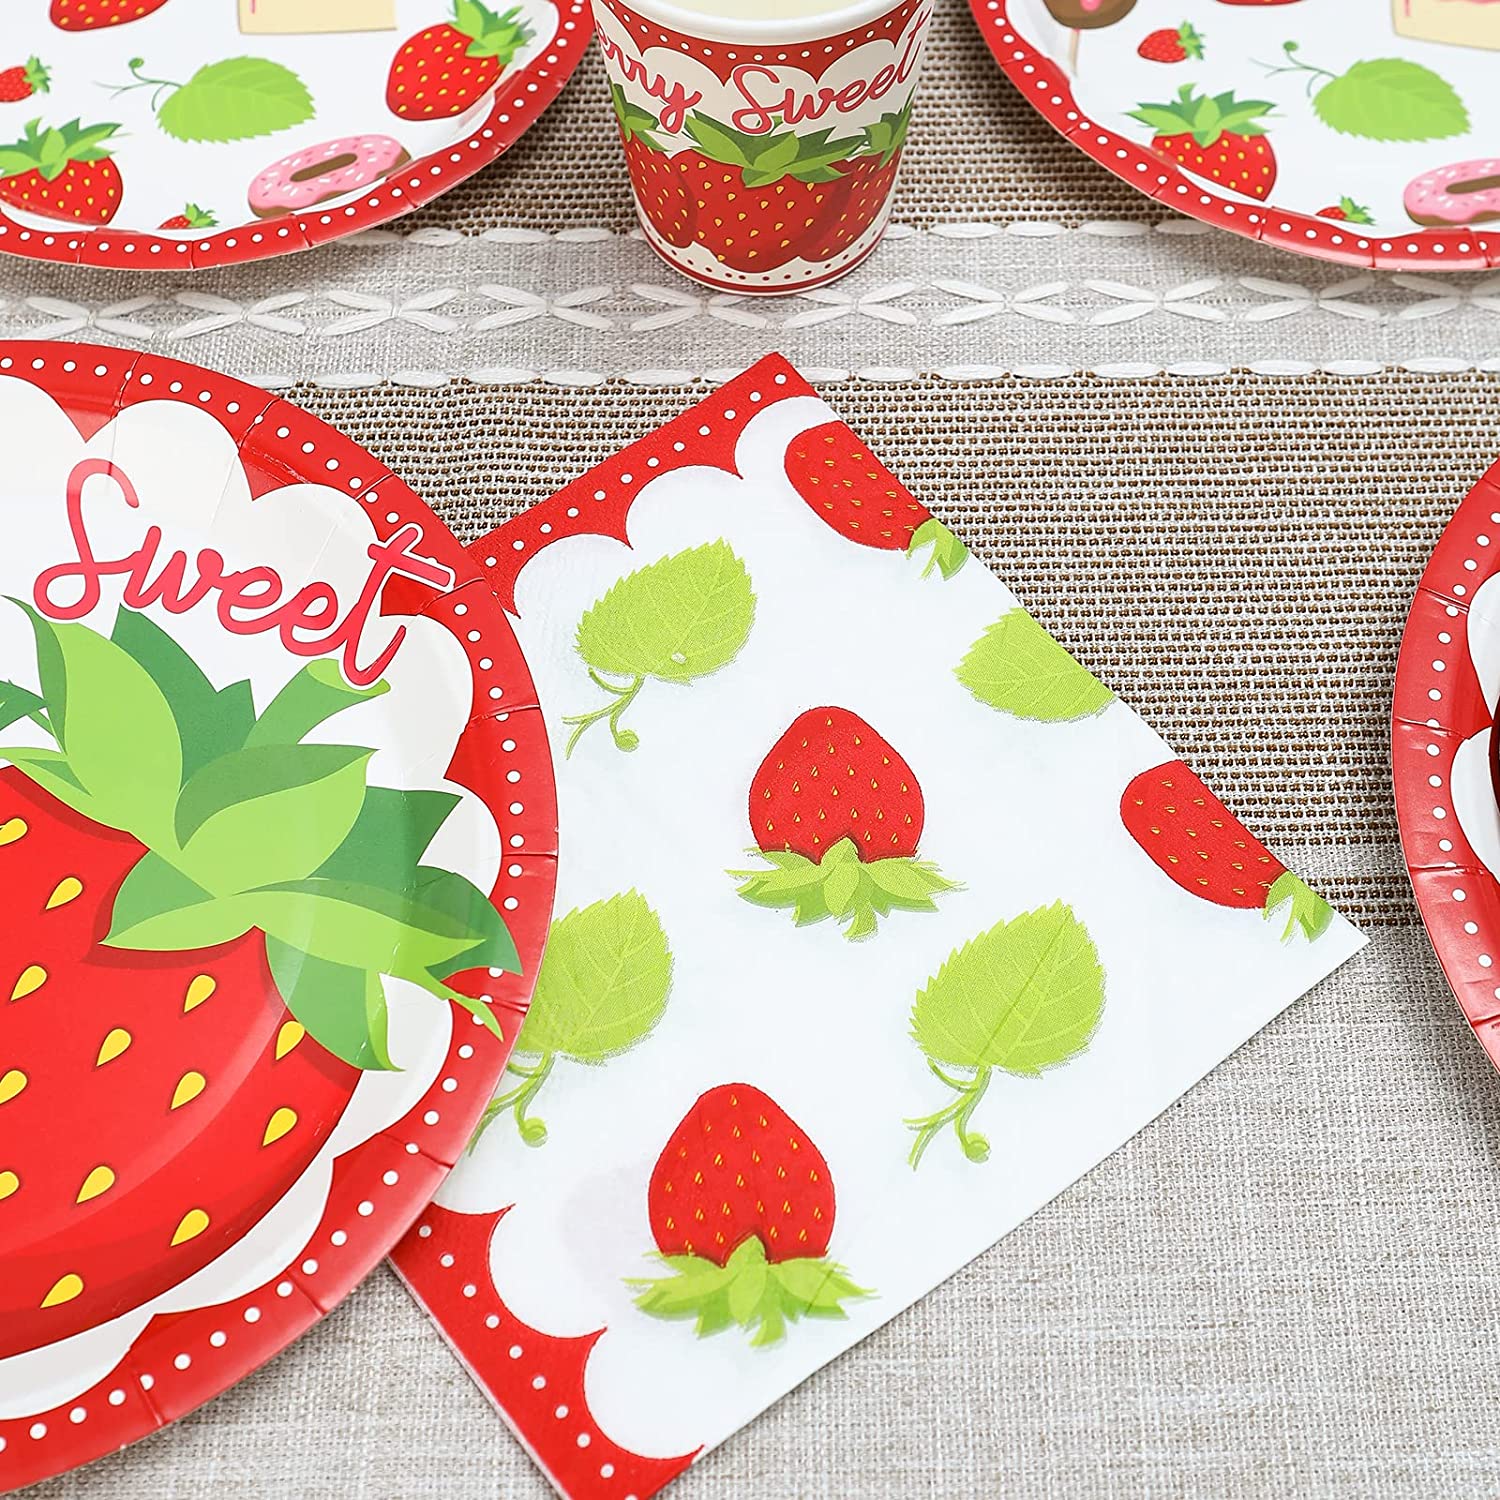 Strawberry Birthday Plates, Cups and Napkins (Serves 24)